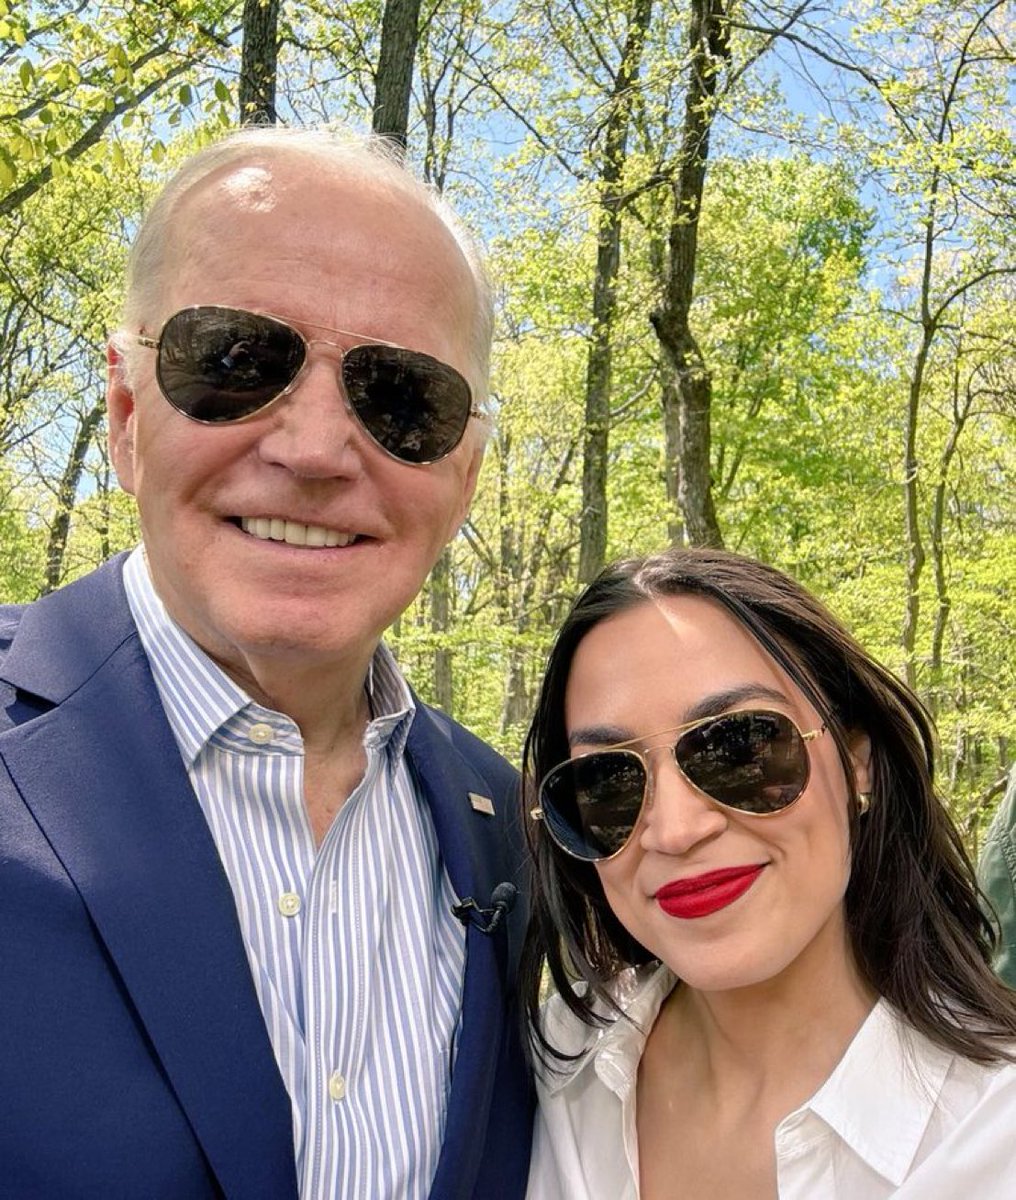 BREAKING: AOC celebrated President Biden today as the most pro-environment President in U.S. history. Let’s go.